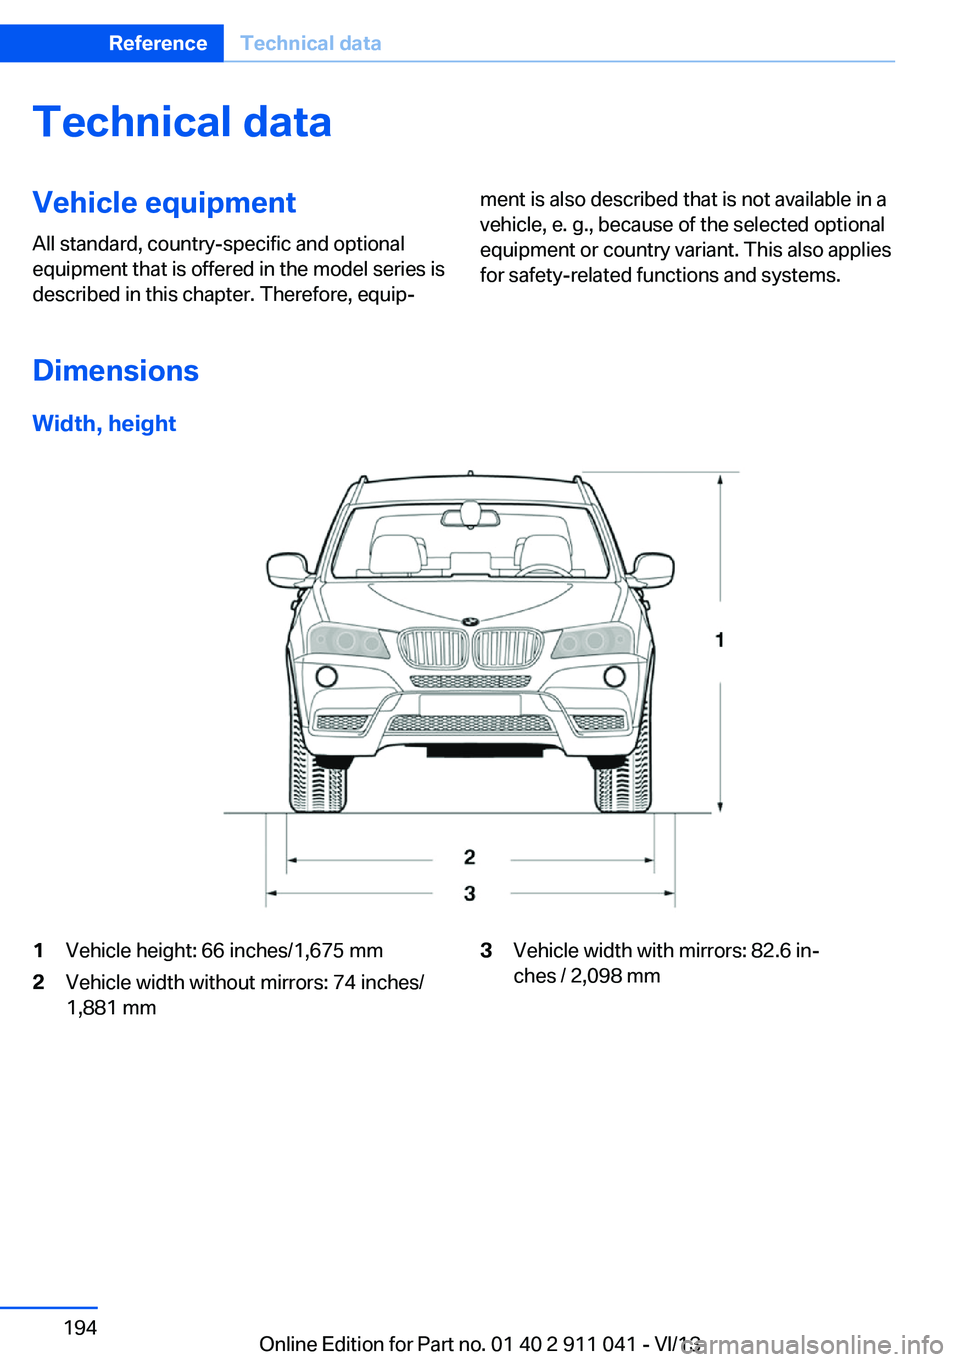 BMW X3 XDRIVE 35I 2014  Owners Manual Technical dataVehicle equipment
All standard, country-specific and optional
equipment that is offered in the model series is
described in this chapter. Therefore, equip‐ment is also described that i